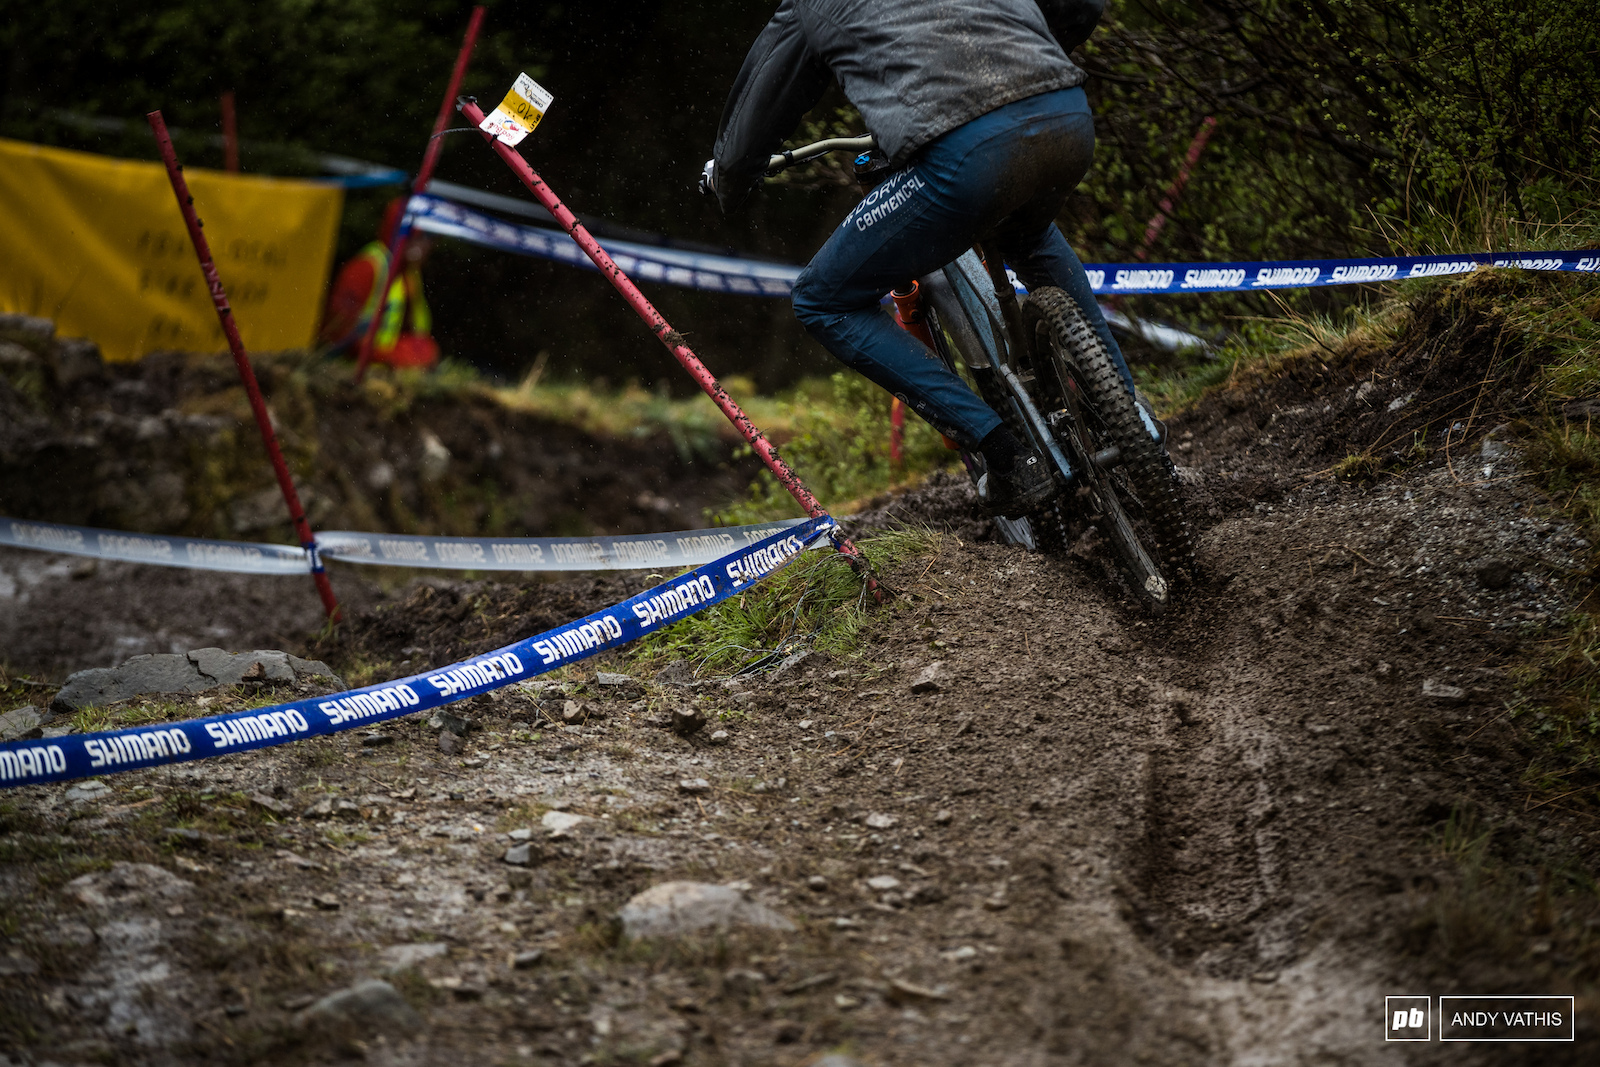 From rock and gravel to the deepest of ruts this grueling track seems to have it all.